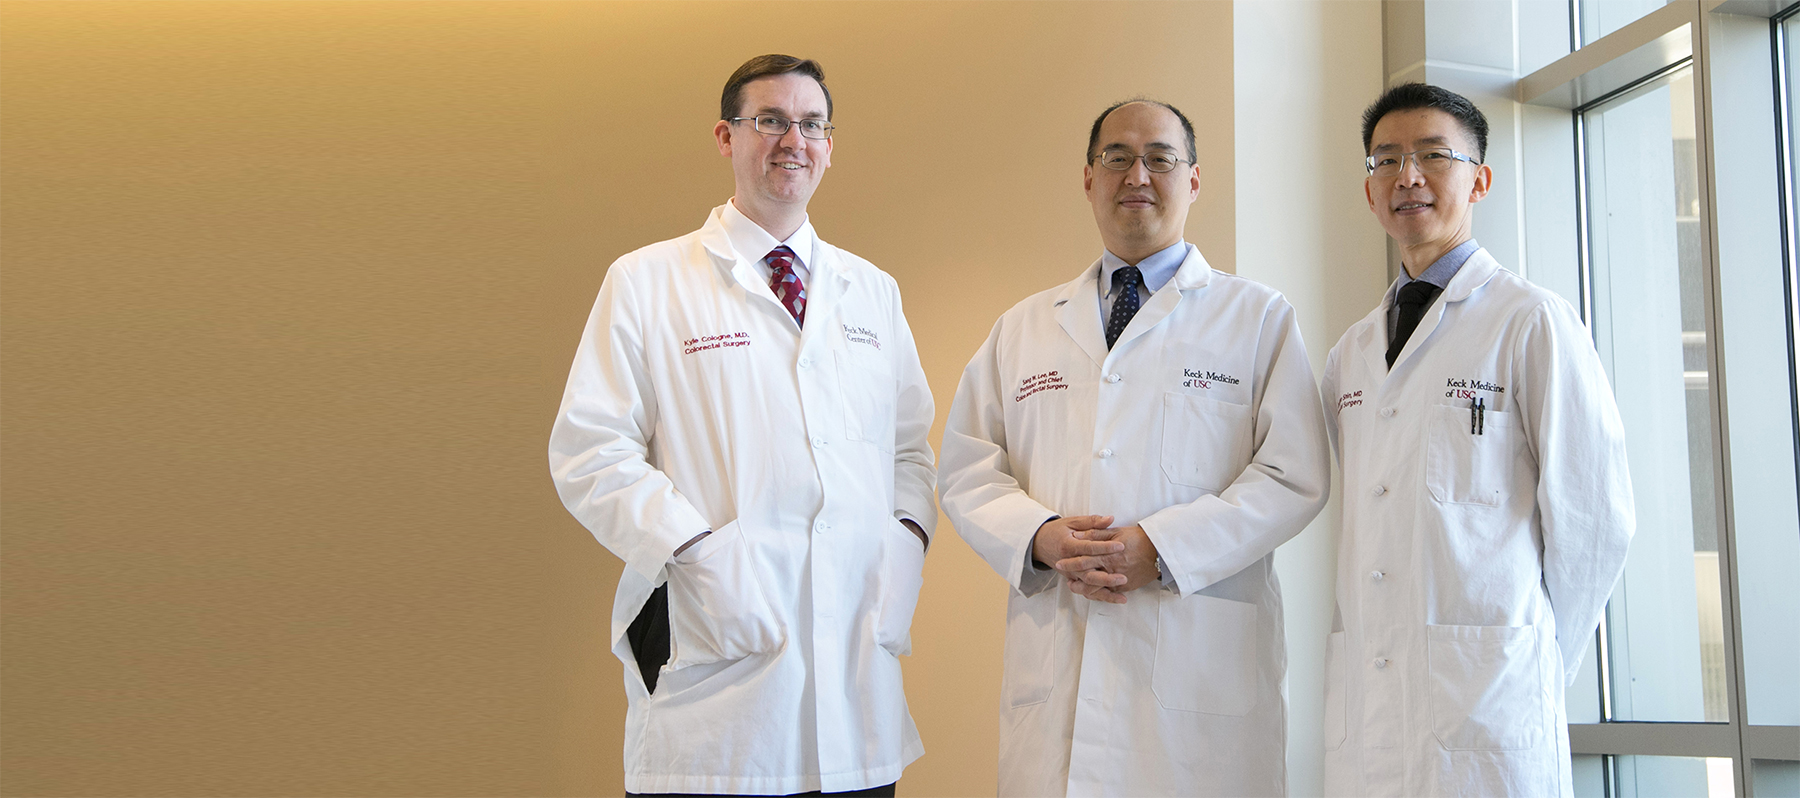 Three of Keck Medicine's colorectal surgeons, who specialize in colon and anal cancer, stand by a tan wall and a large window